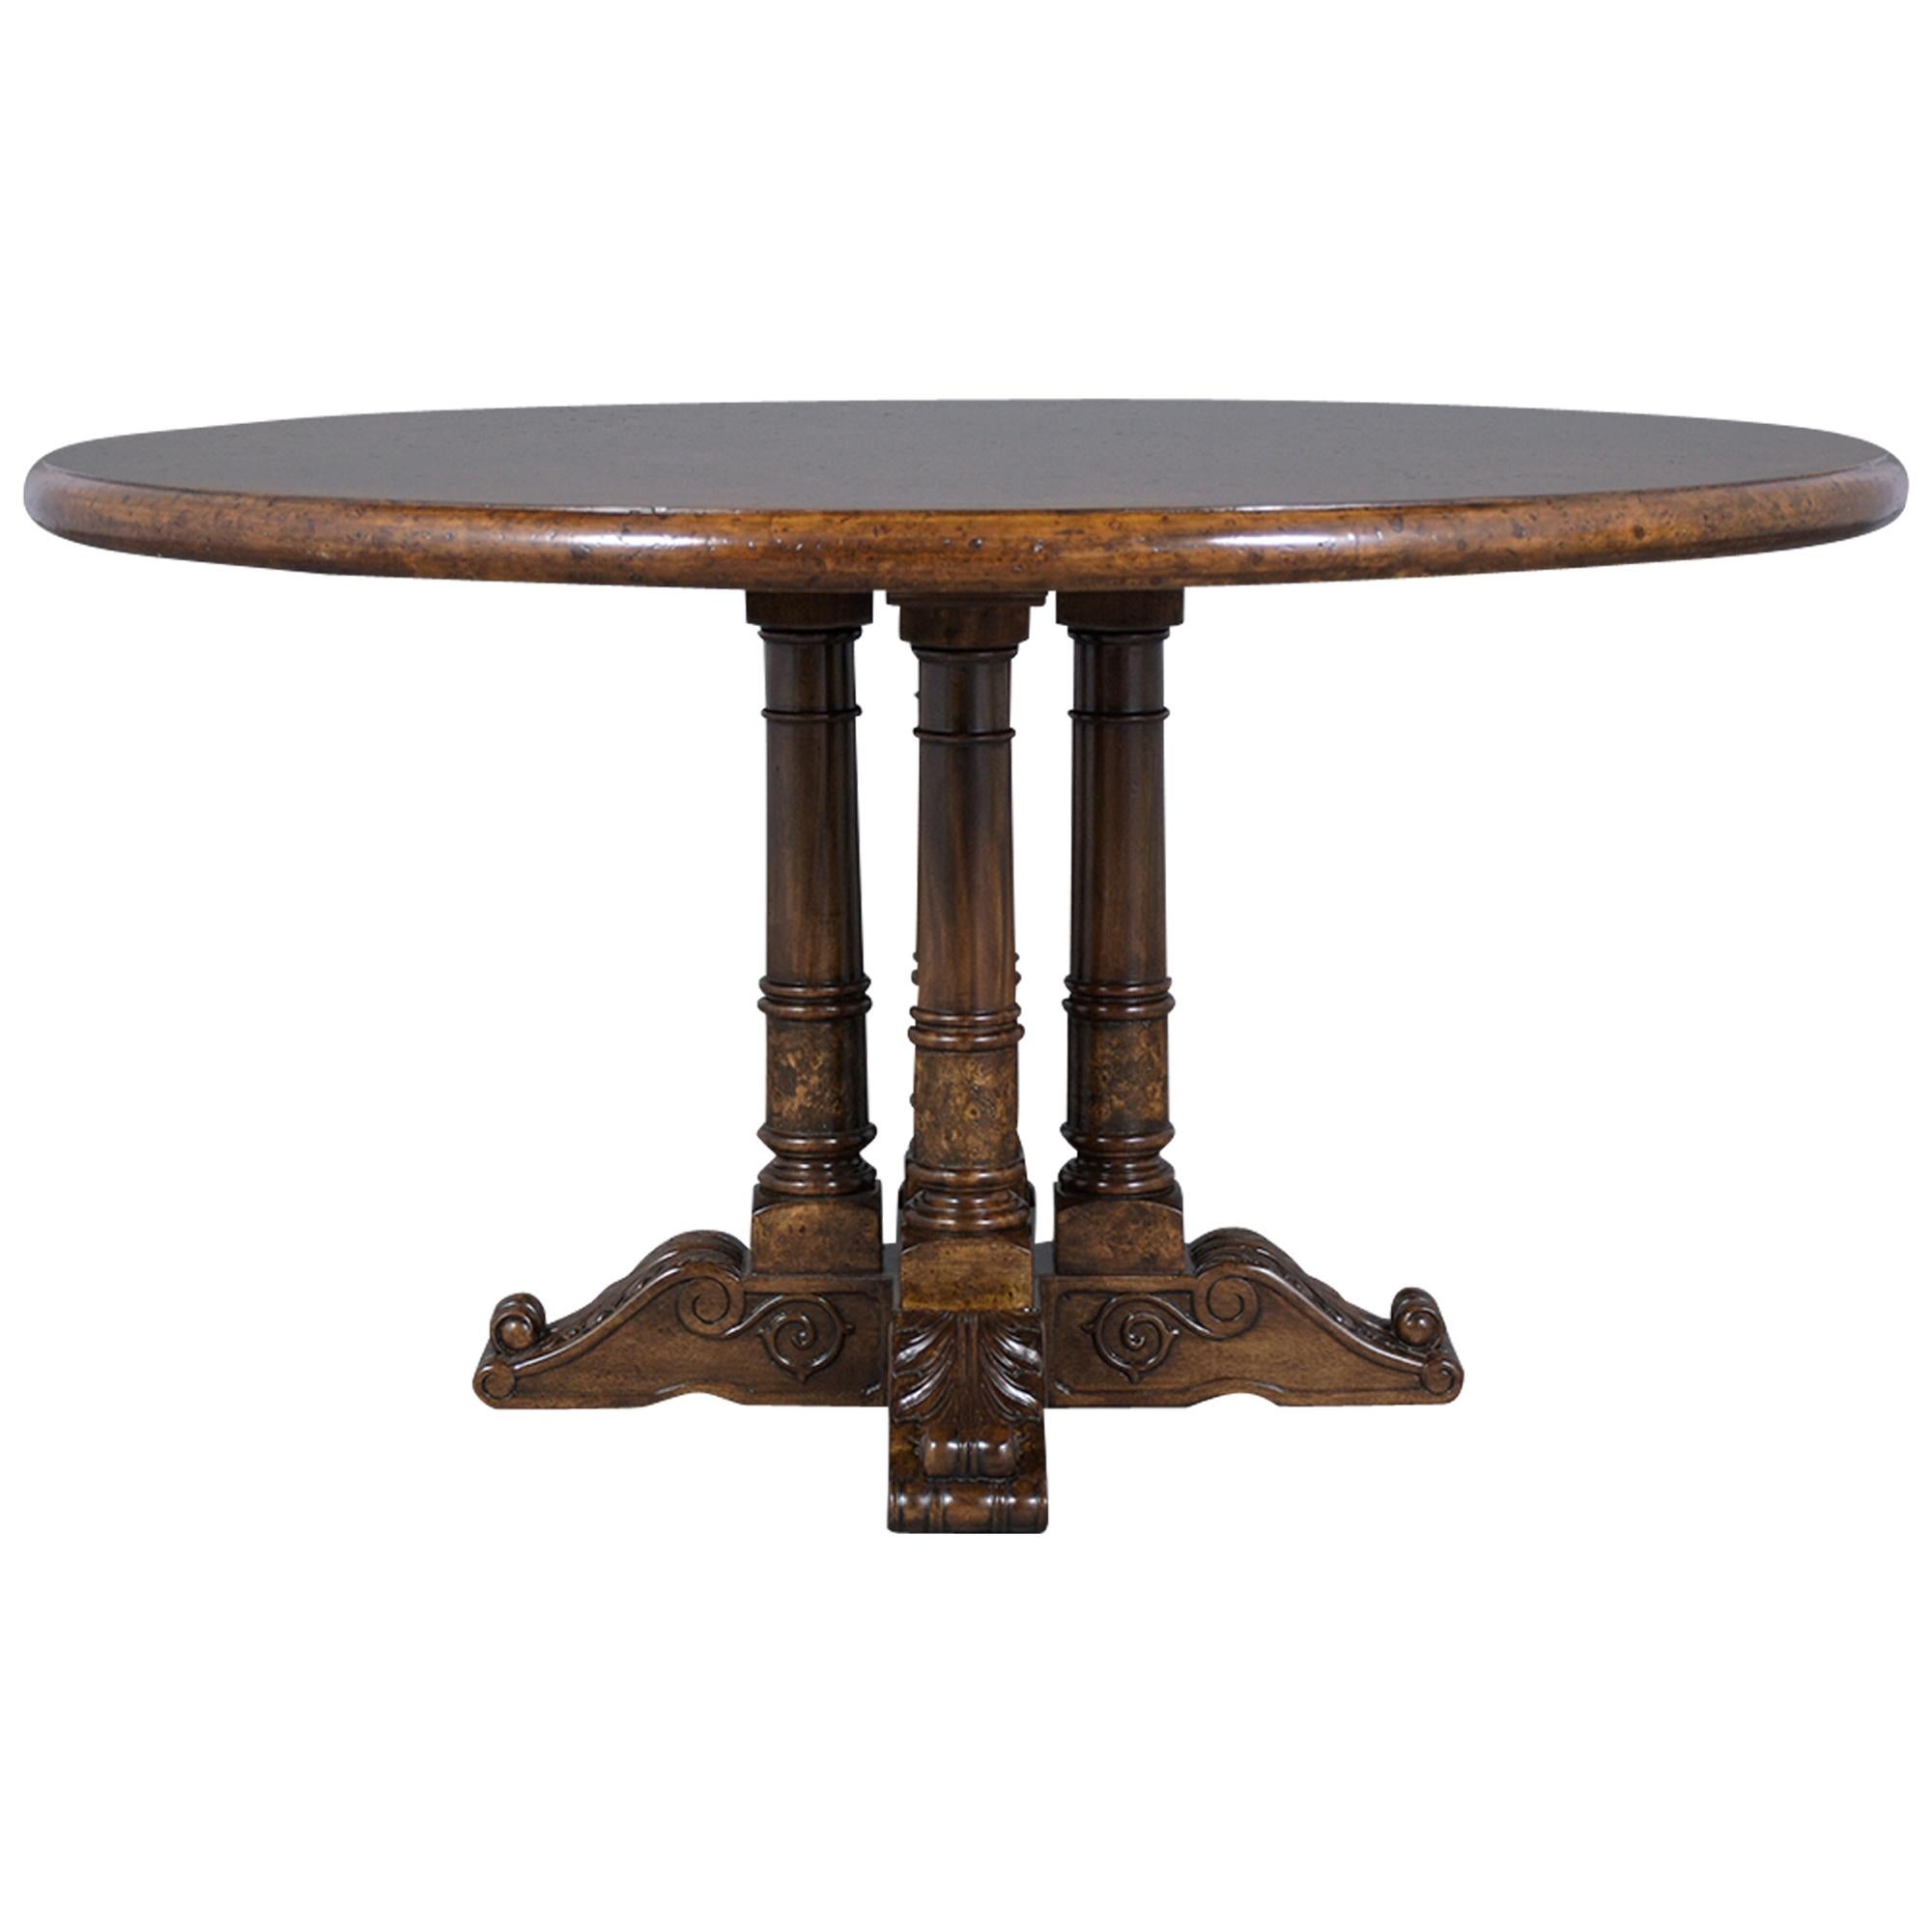 An excellent vintage empire-style dining table hand-crafted out of solid wood covered with birch-eye veneers and has been professionally restored. This fabulous circular dining table features a new dark walnut color with a lacquer finish and a